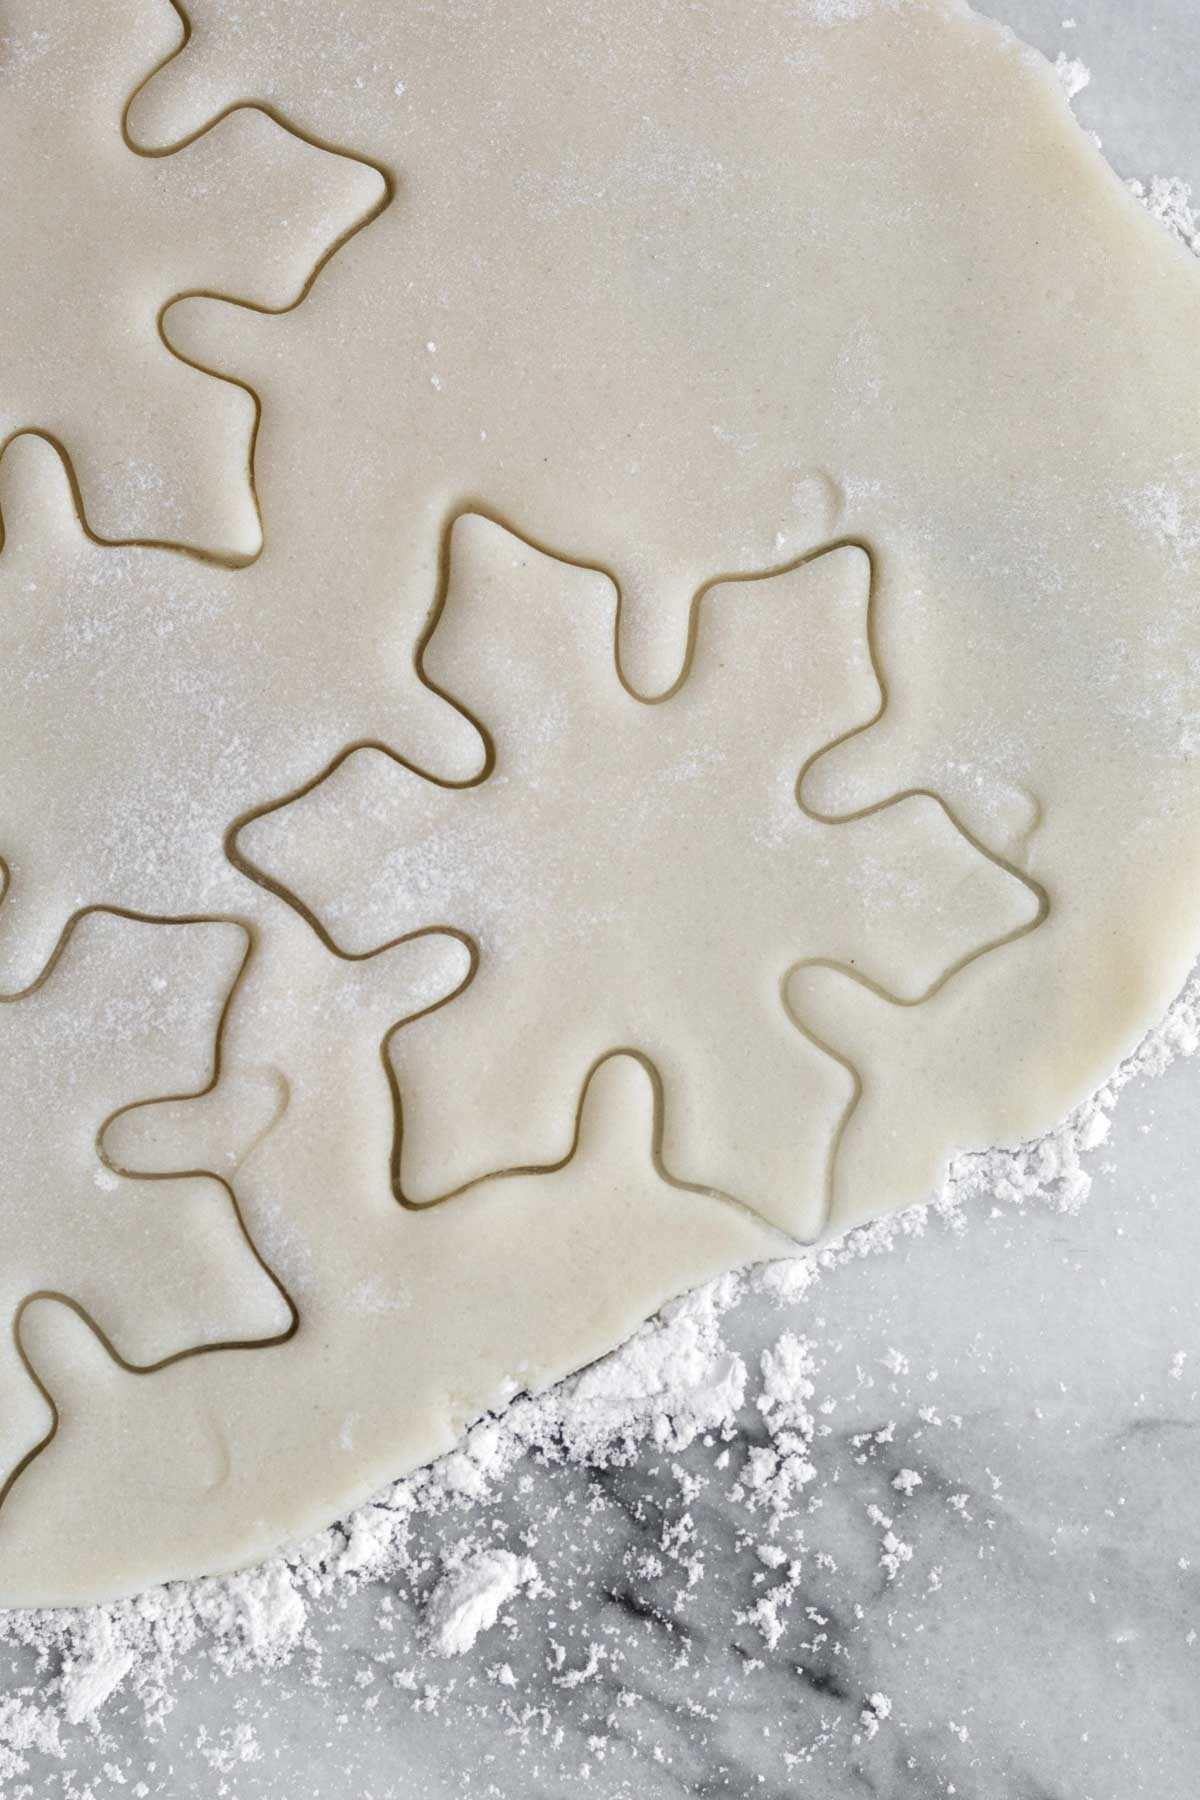 Snowflake shaped cookie cuts on the dough.